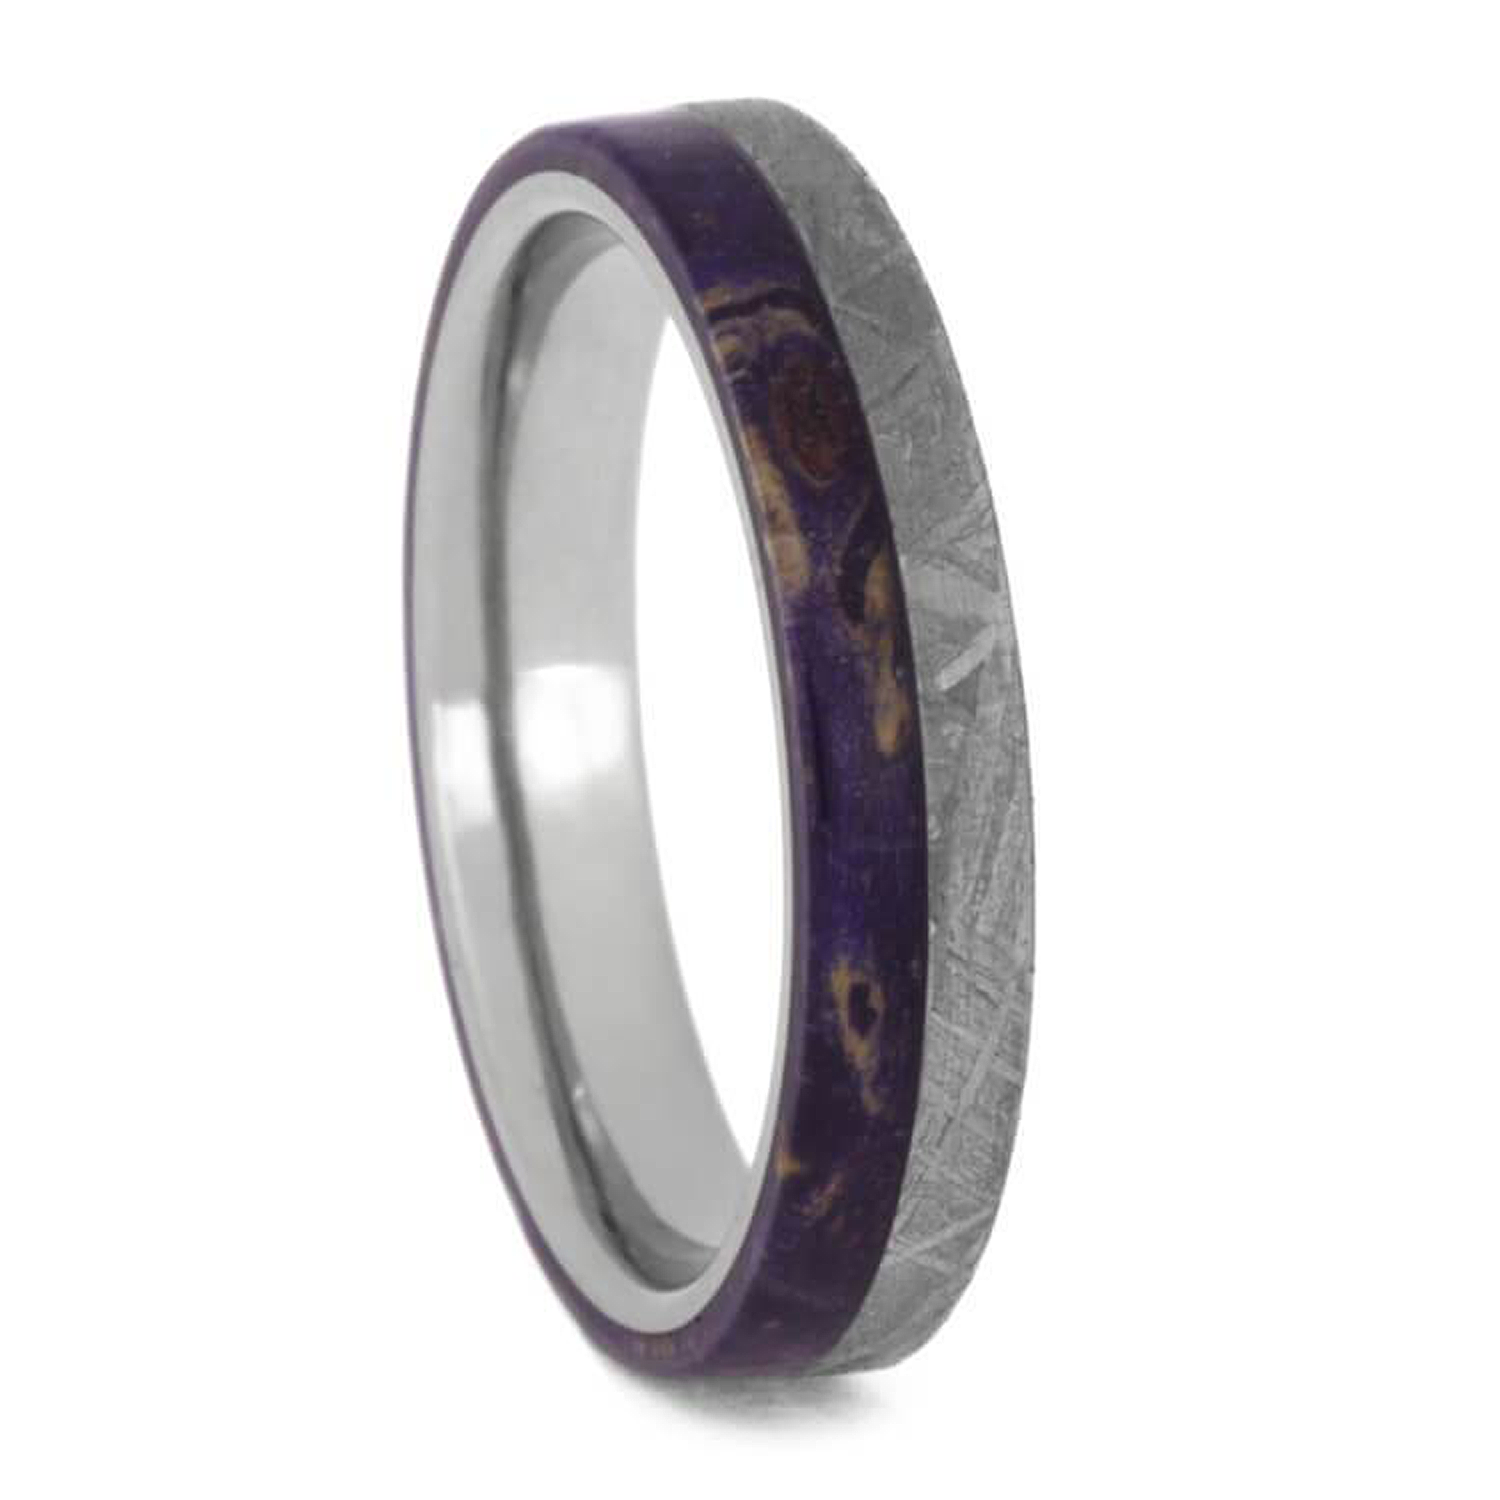 Hand made Gibeon Meteorite and Purple Elder Wood overlays on a 4.00 millimeter, comfort-fit, matte finished titanium band. 